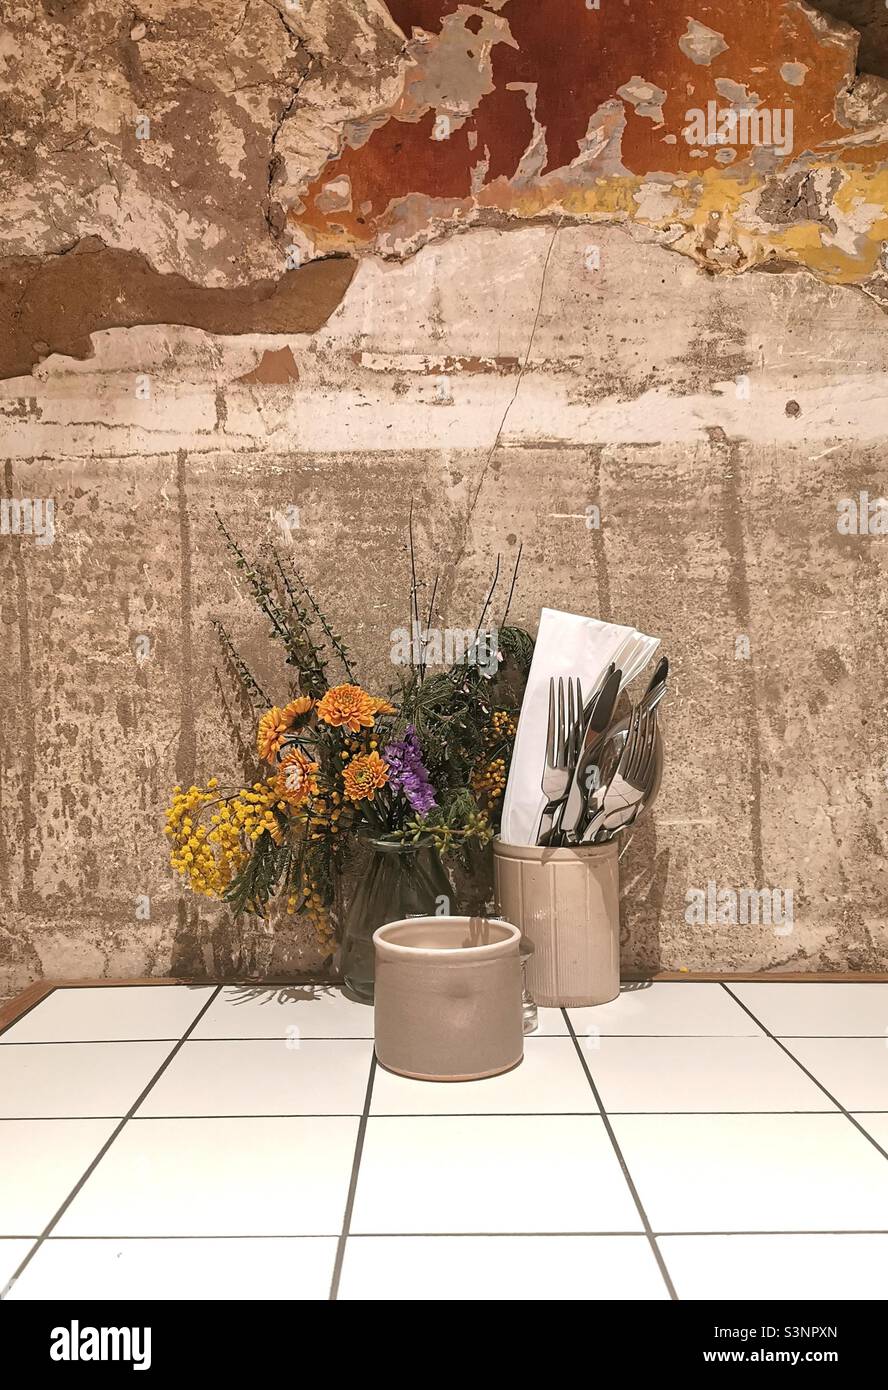 Set café table with natural wall and wild flowers Stock Photo